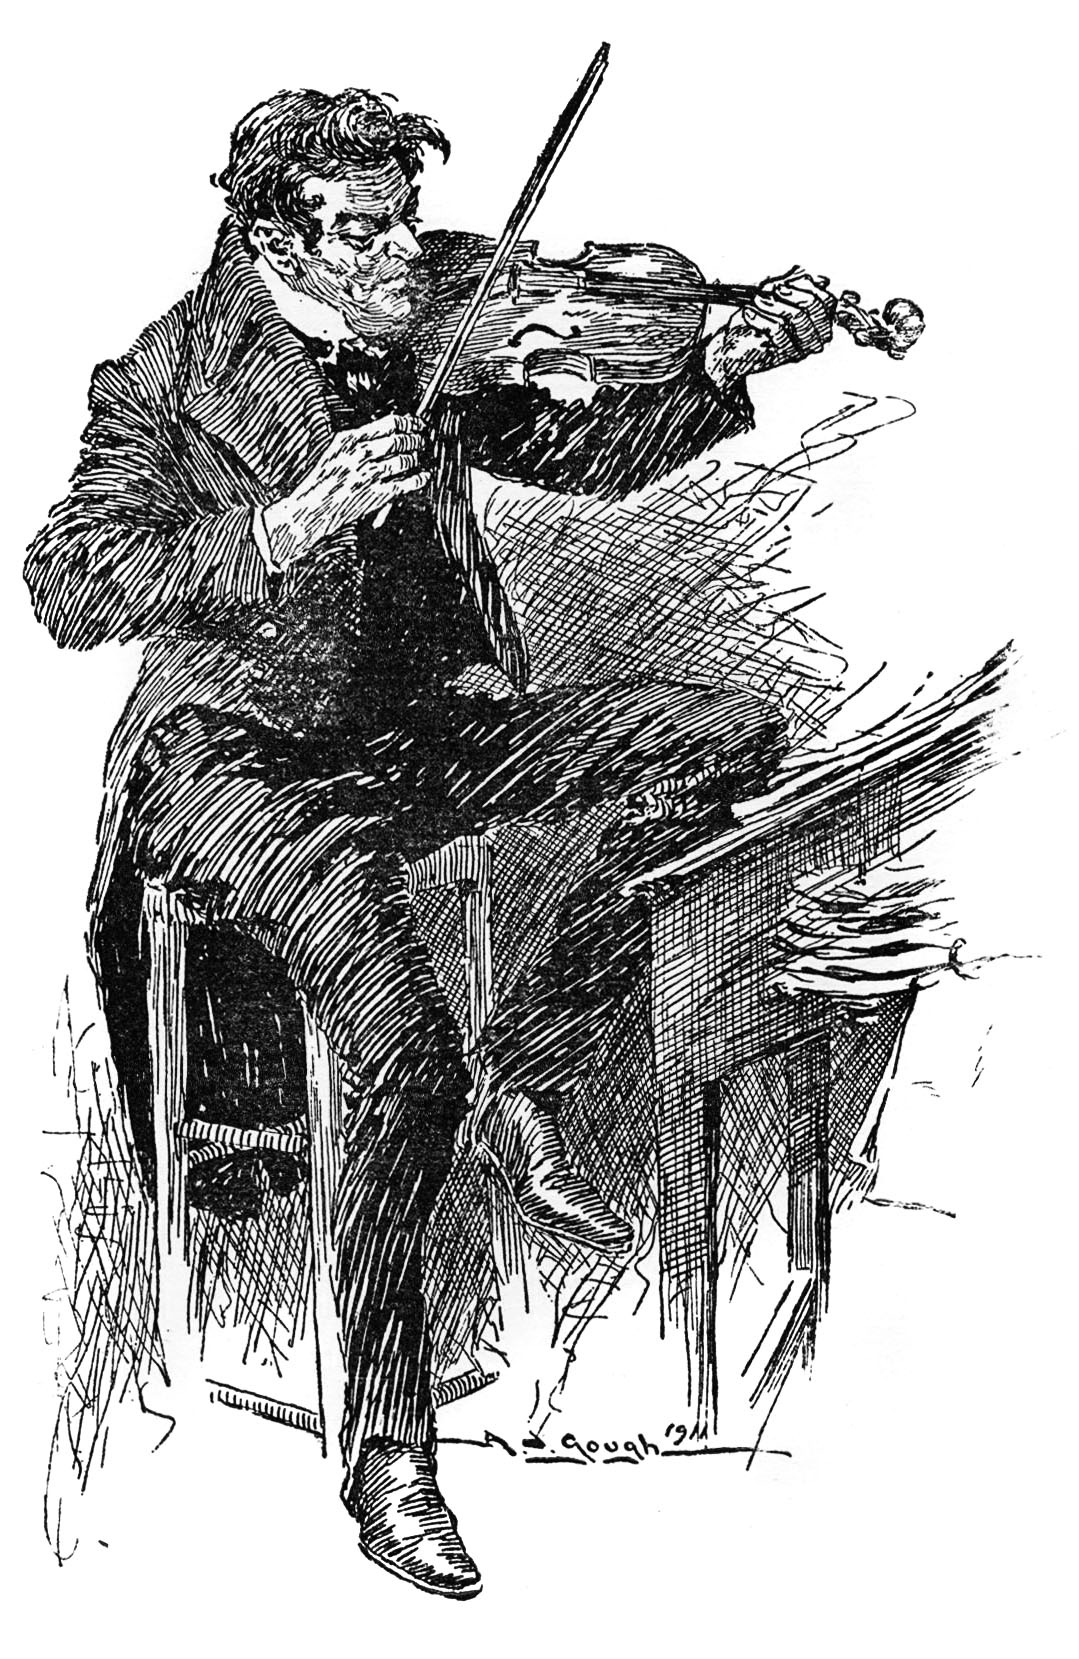 A seated fiddler, drawing his bow across the strings